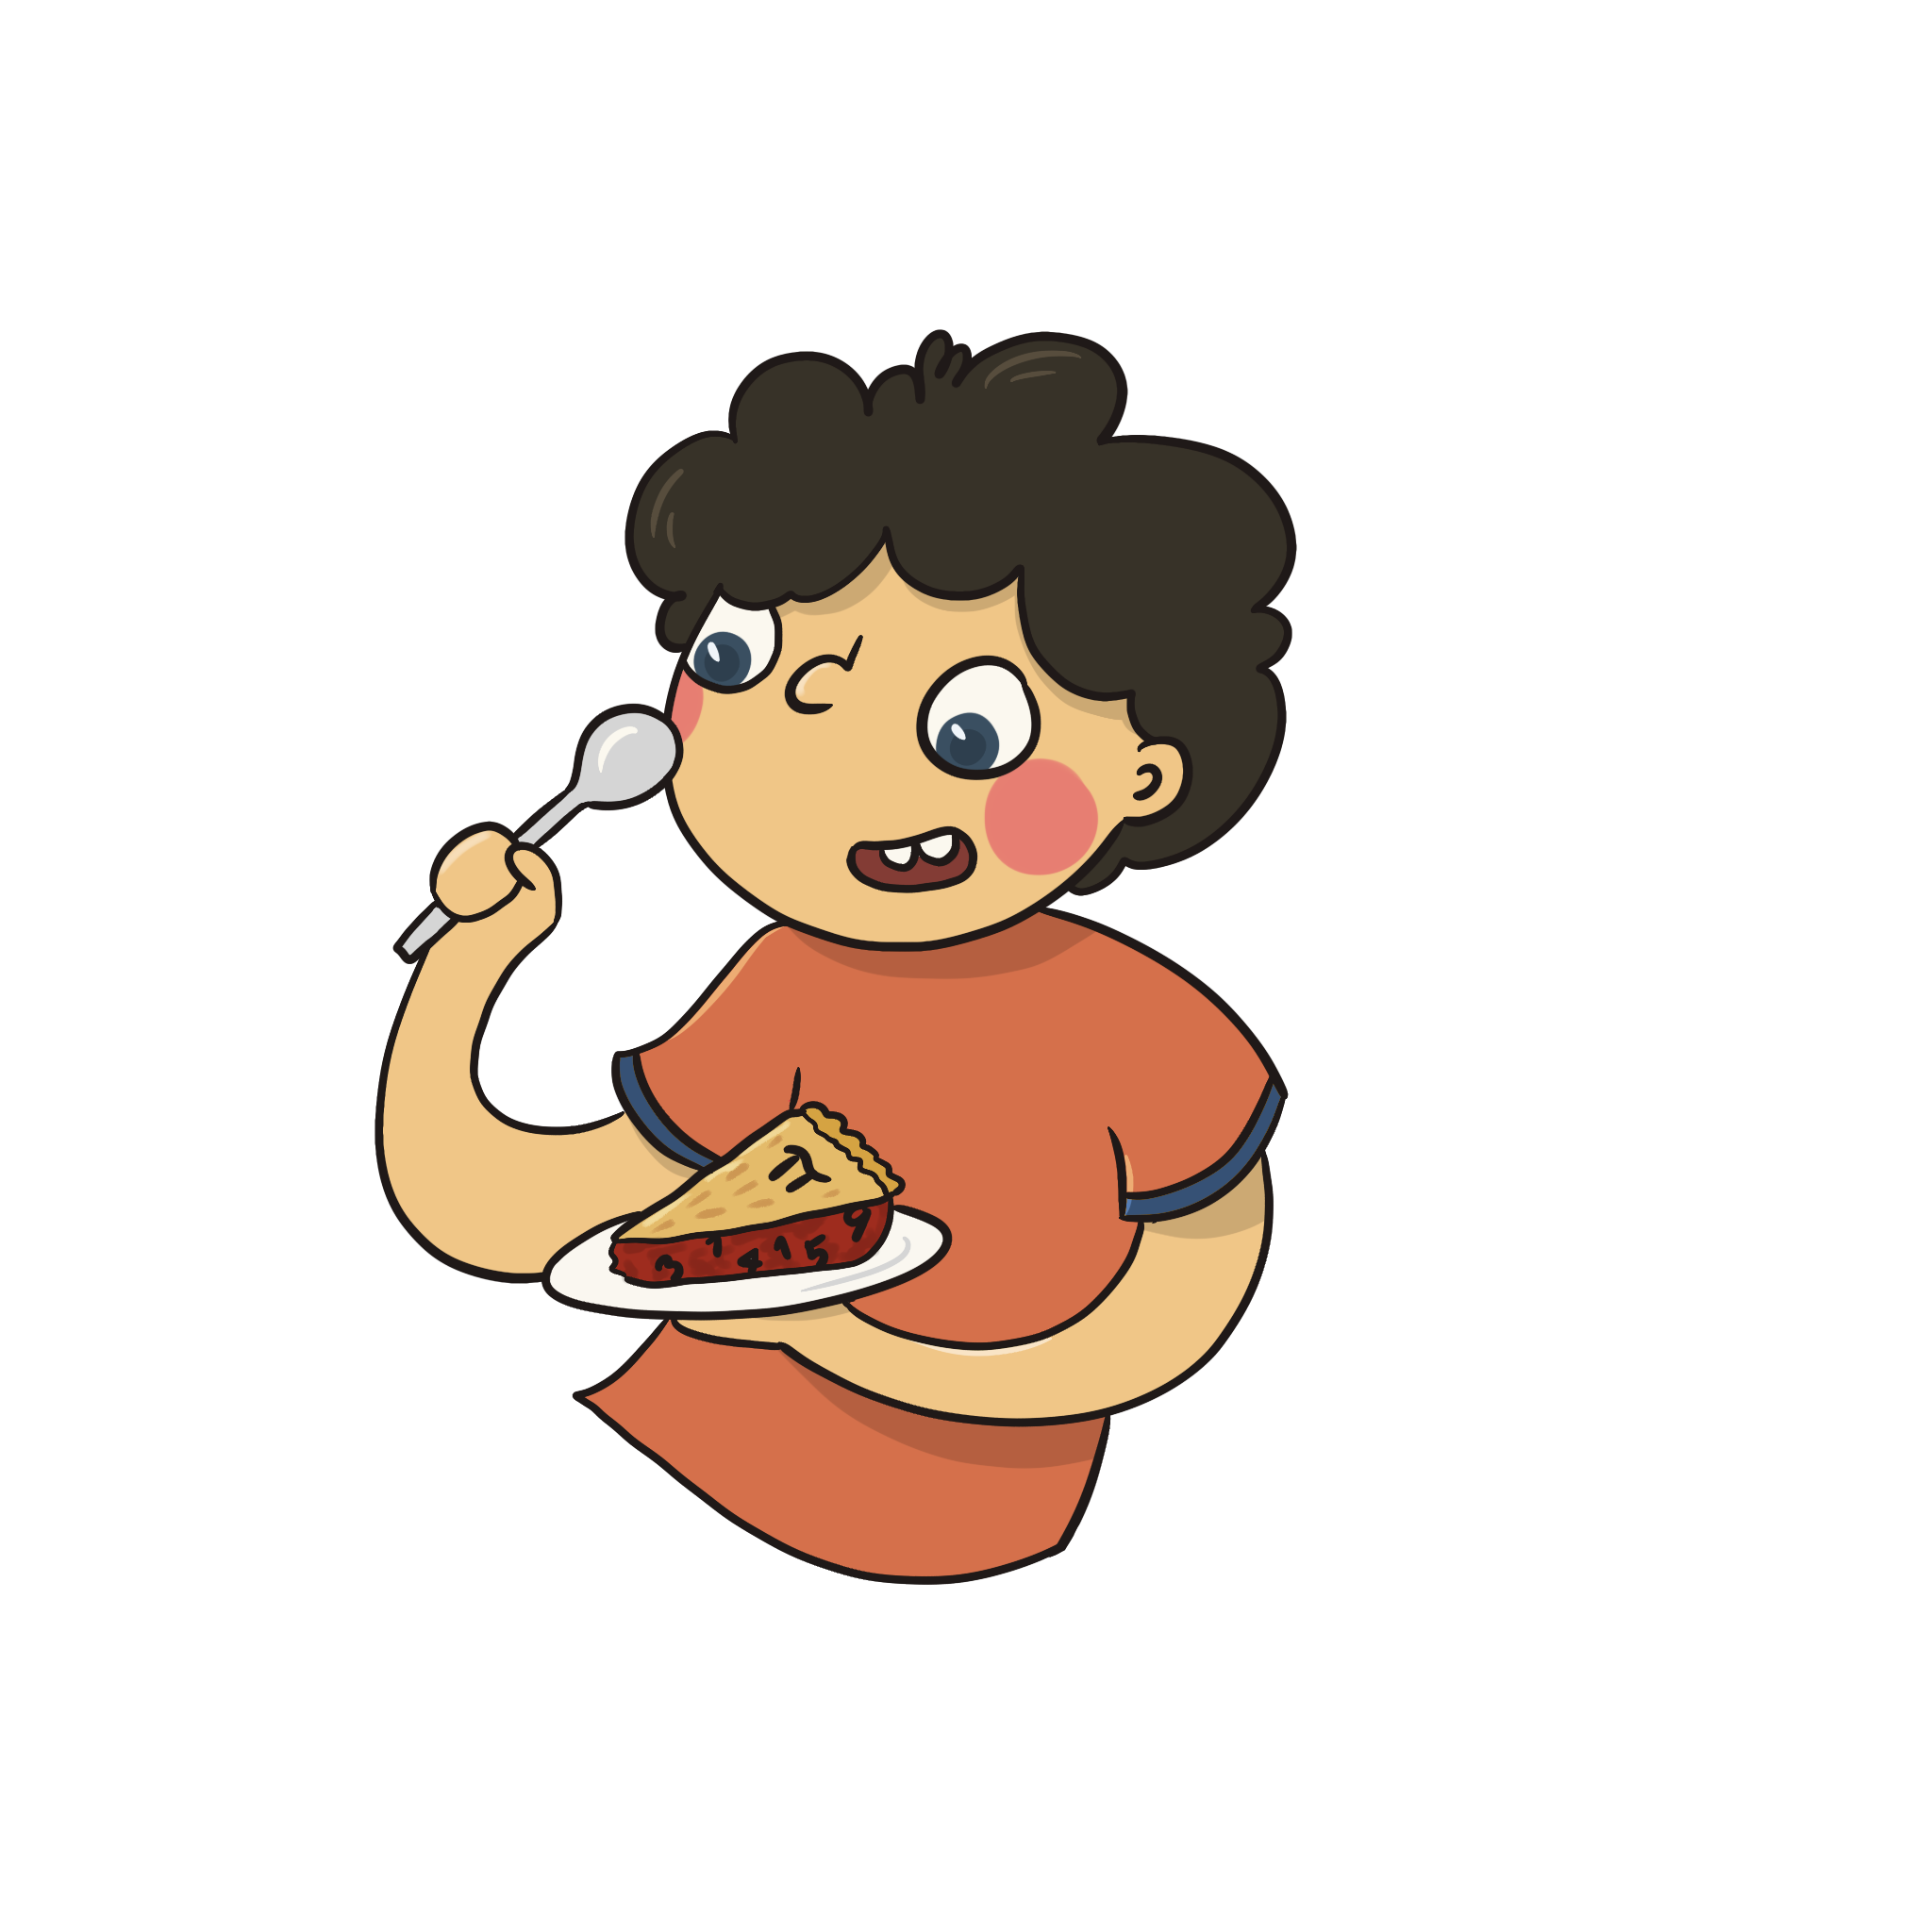 A photo of a cartoon character with rosy cheeks, an orange shirt, and brown hair eating a slice of pie with the pi sign carved into it